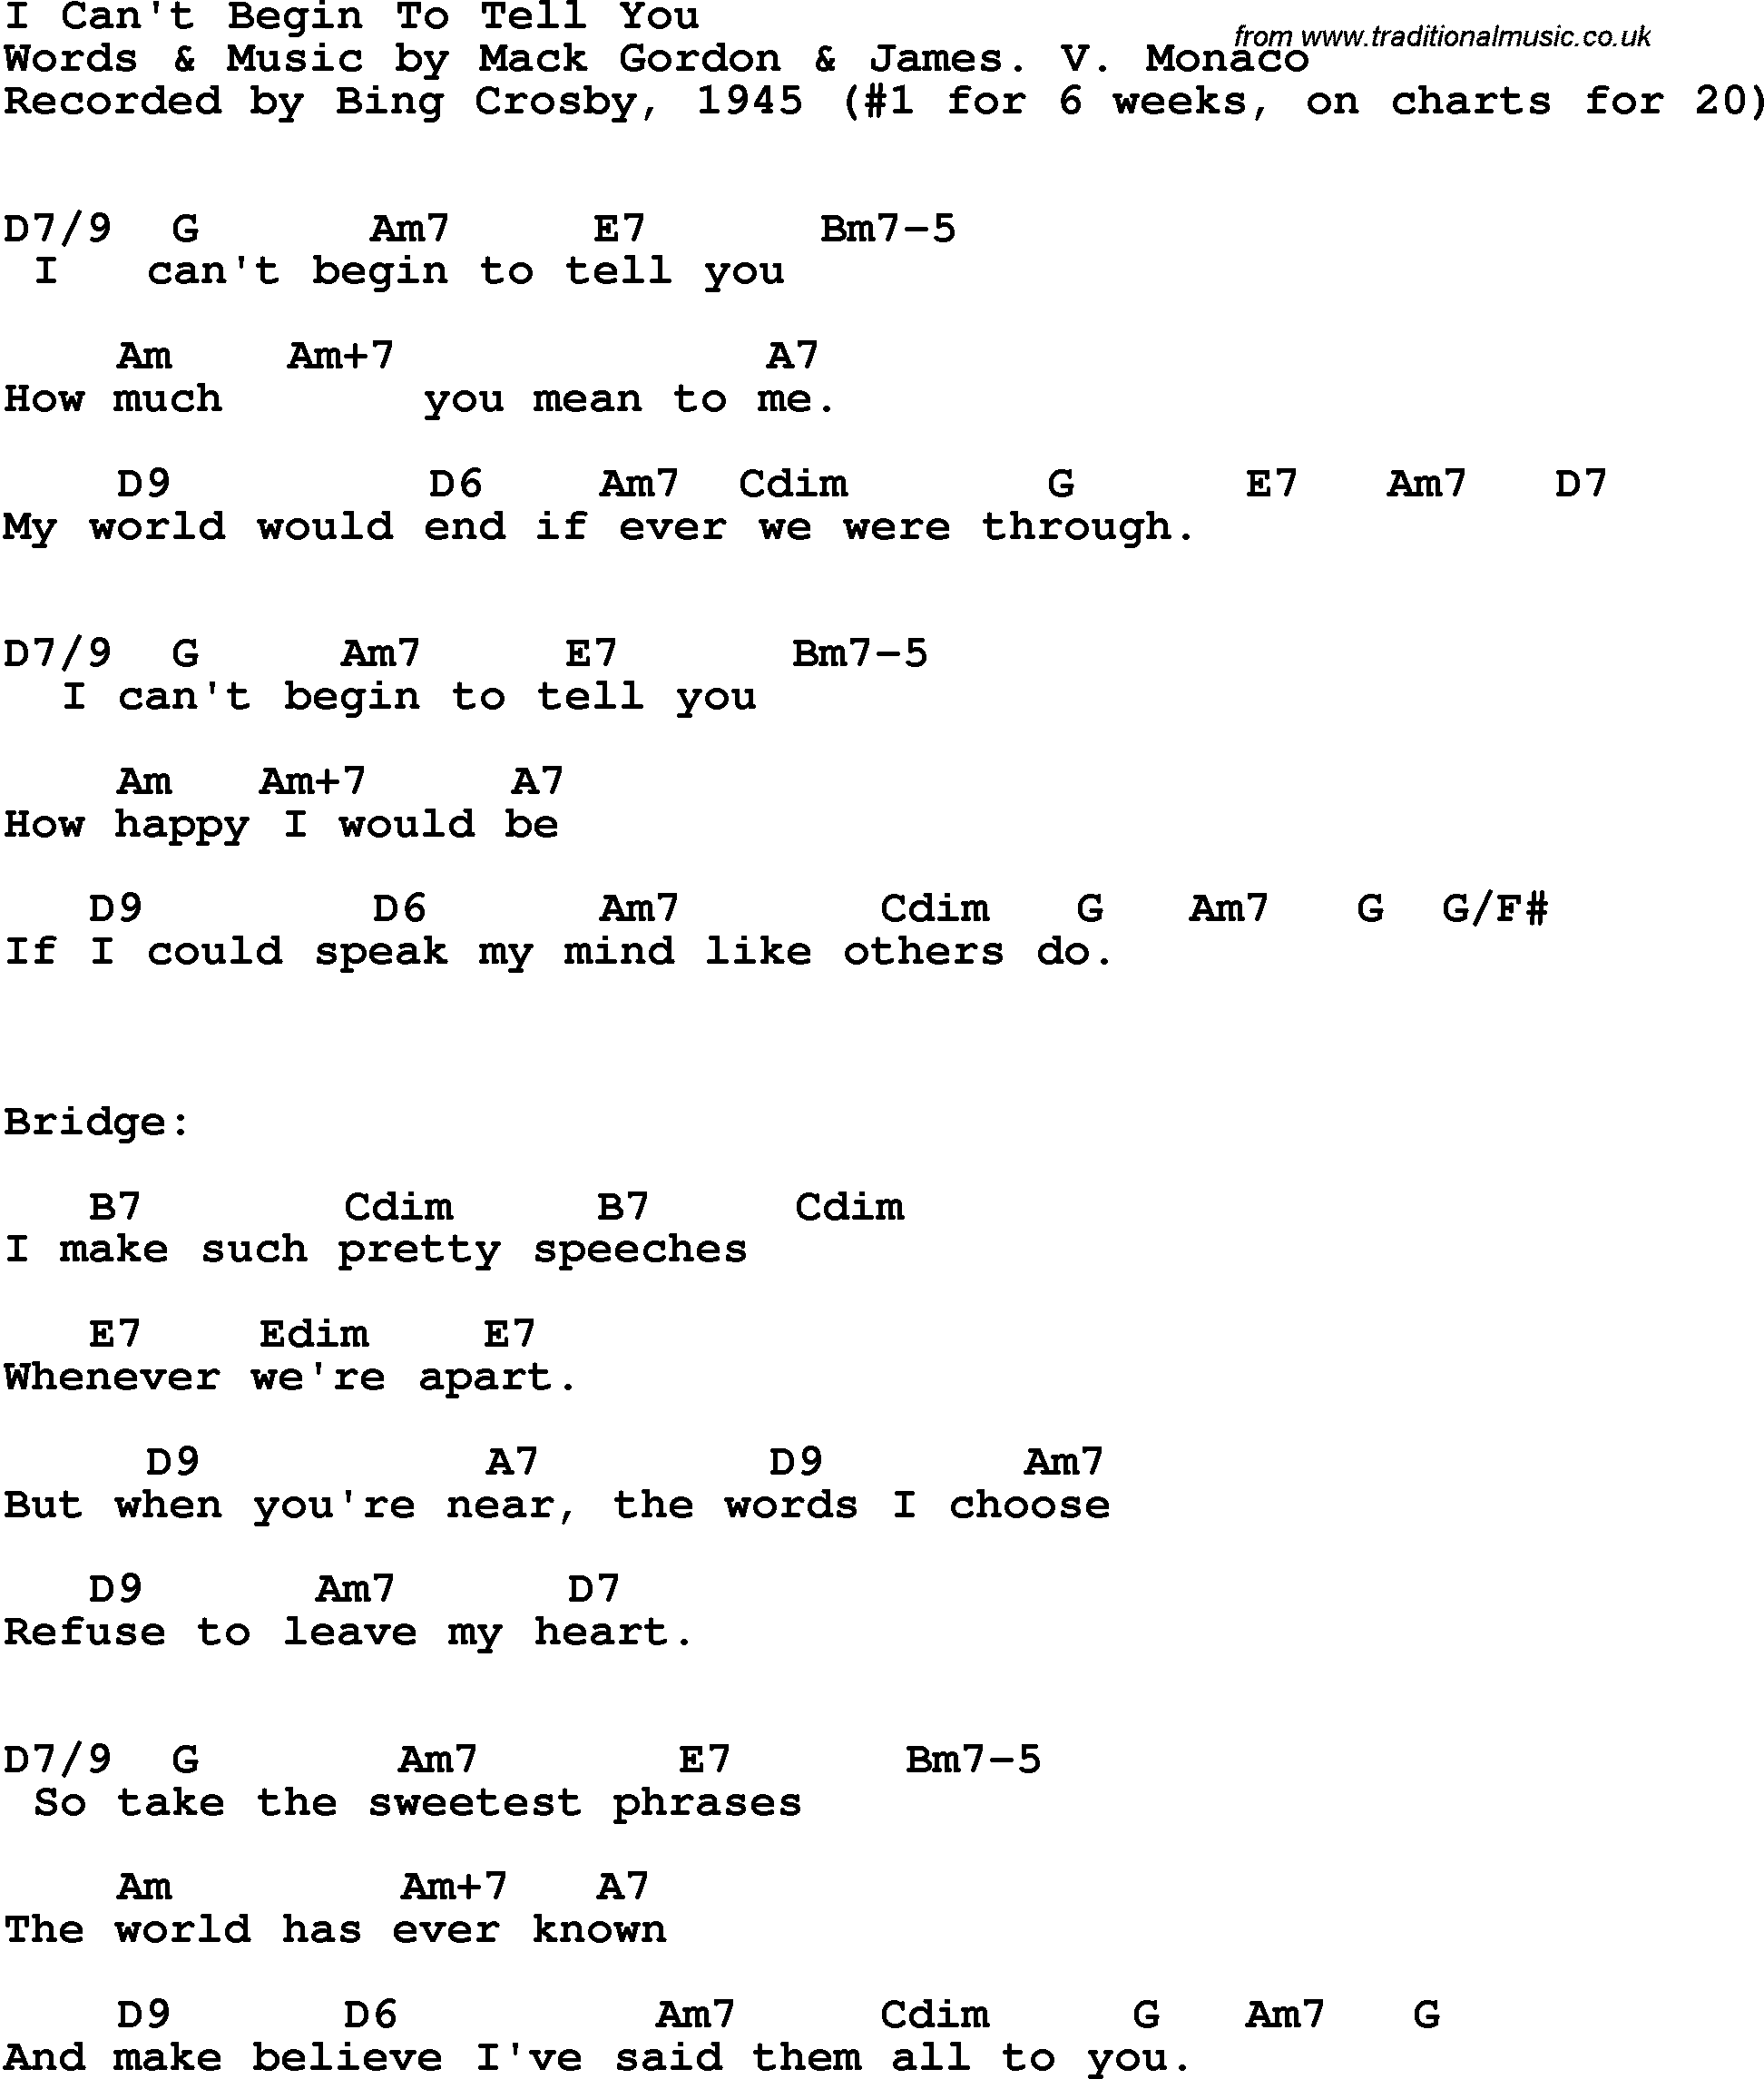 Song Lyrics with guitar chords for I Can't Begin To Tell You - Bing Crosby, 1945